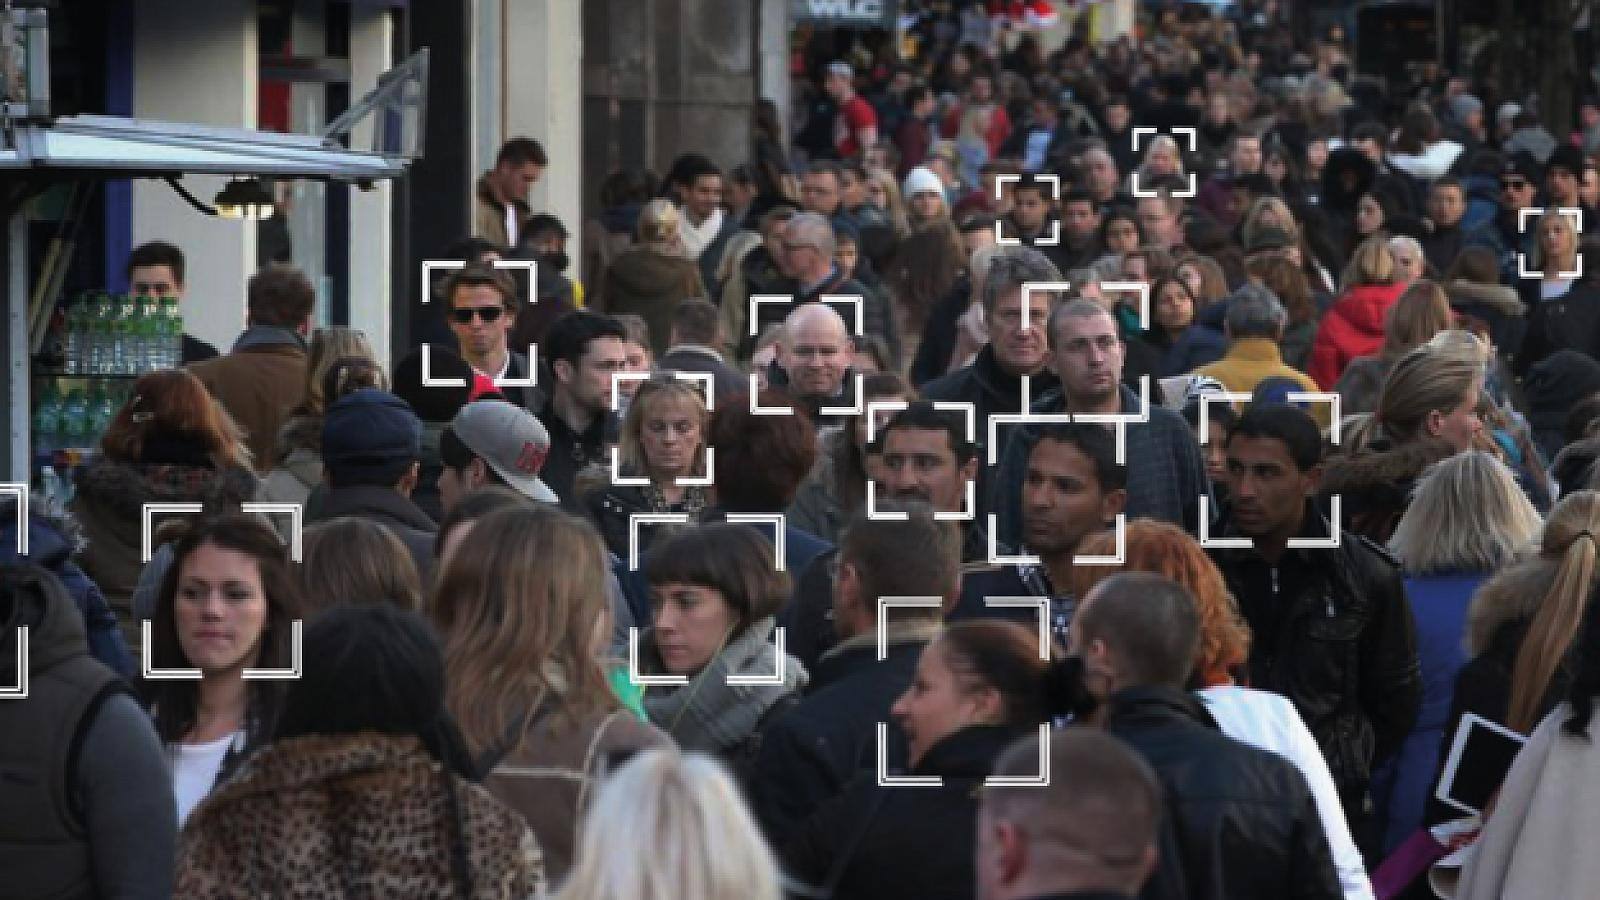 The Met Police spent £200k on controversial facial recognition tech